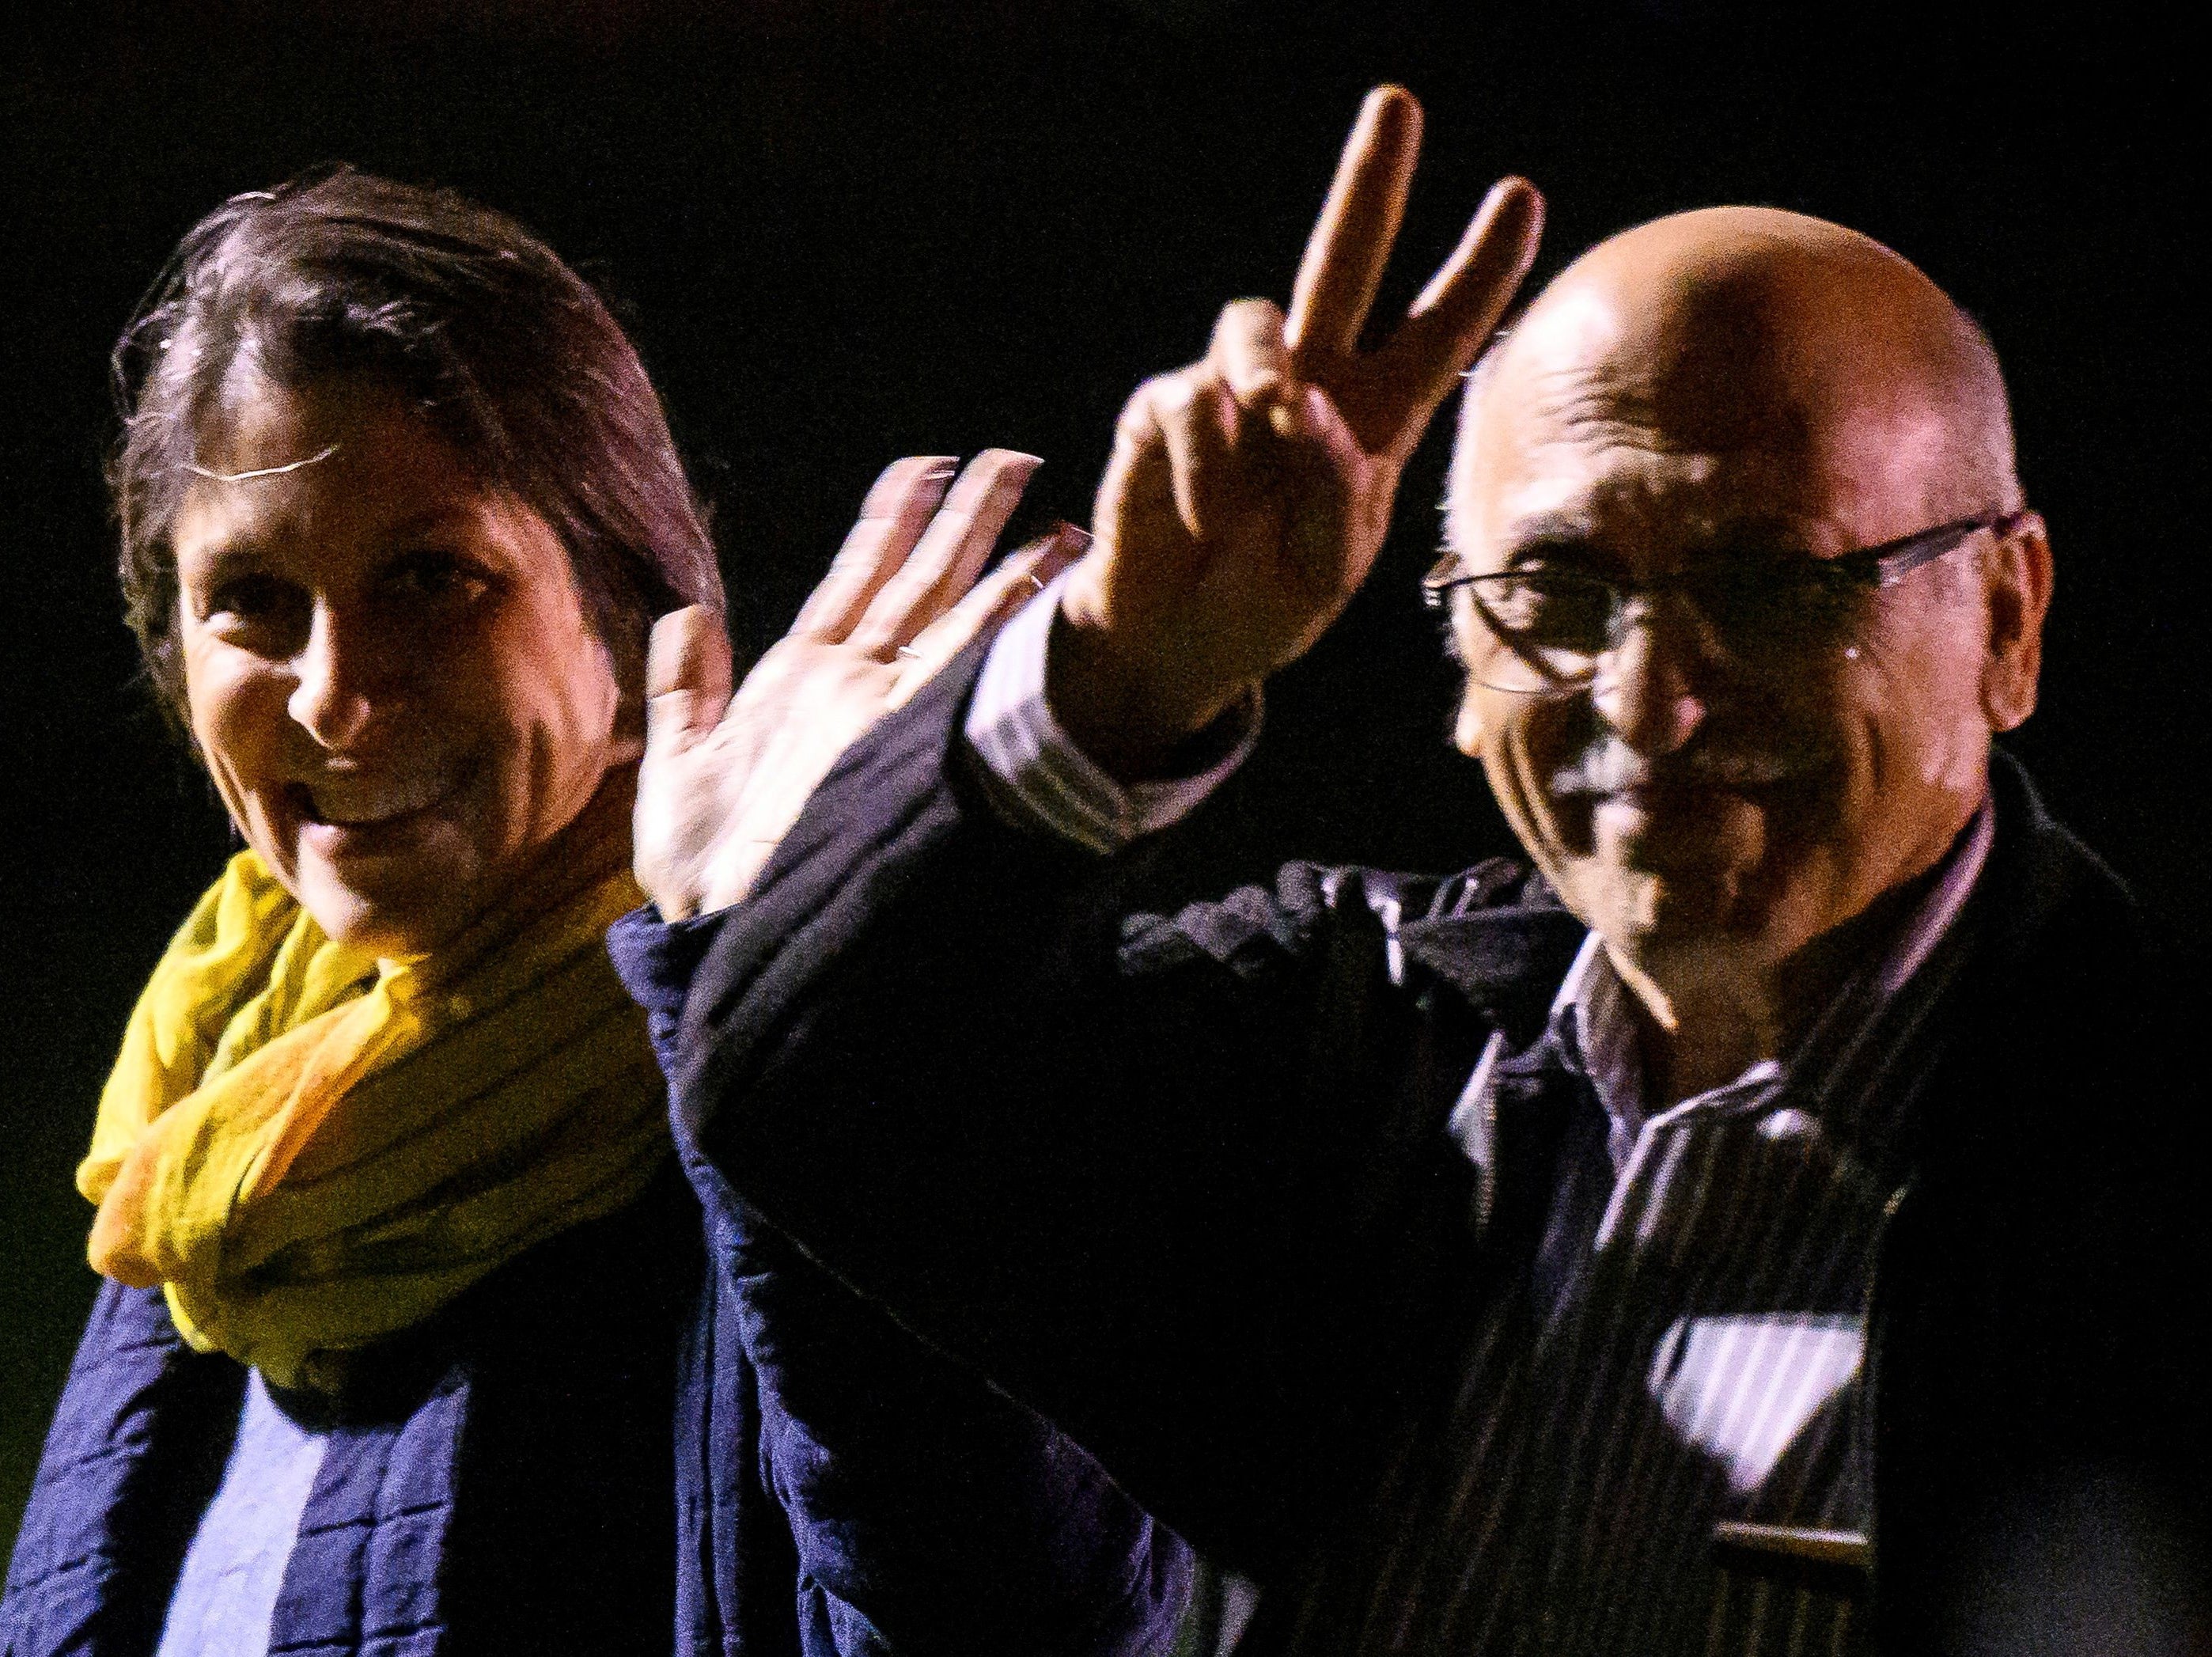 Nazanin Zaghari-Ratcliffe smiles and waves at cameras while fellow British-Iranian detainee Anoosheh Ashoori gives the peace sign after they arrive at RAF Brize Norton shortly after 1am